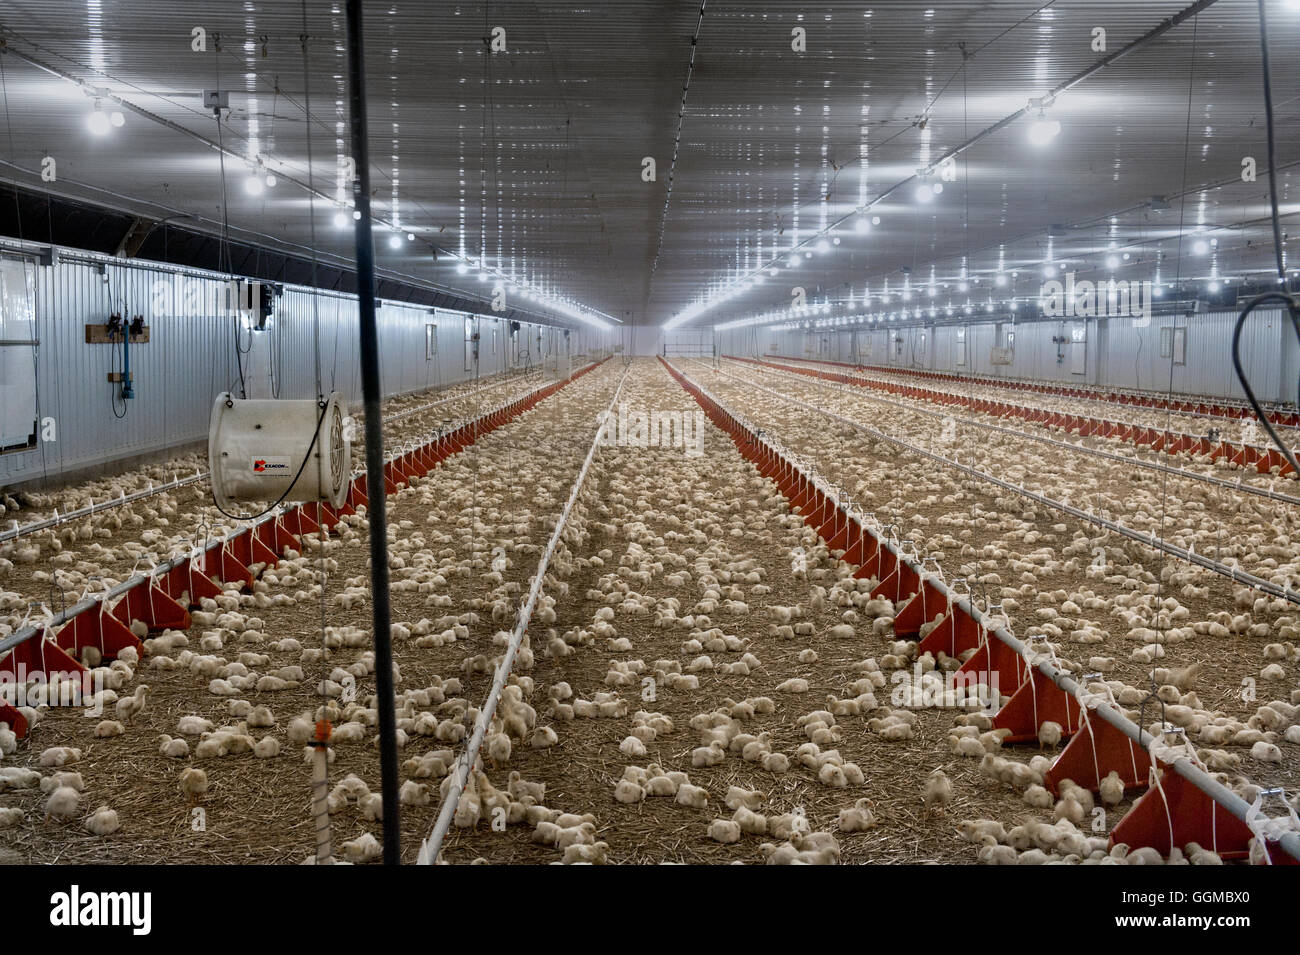 7 day old broiler chickens in commercial chicken barn Stock Photo